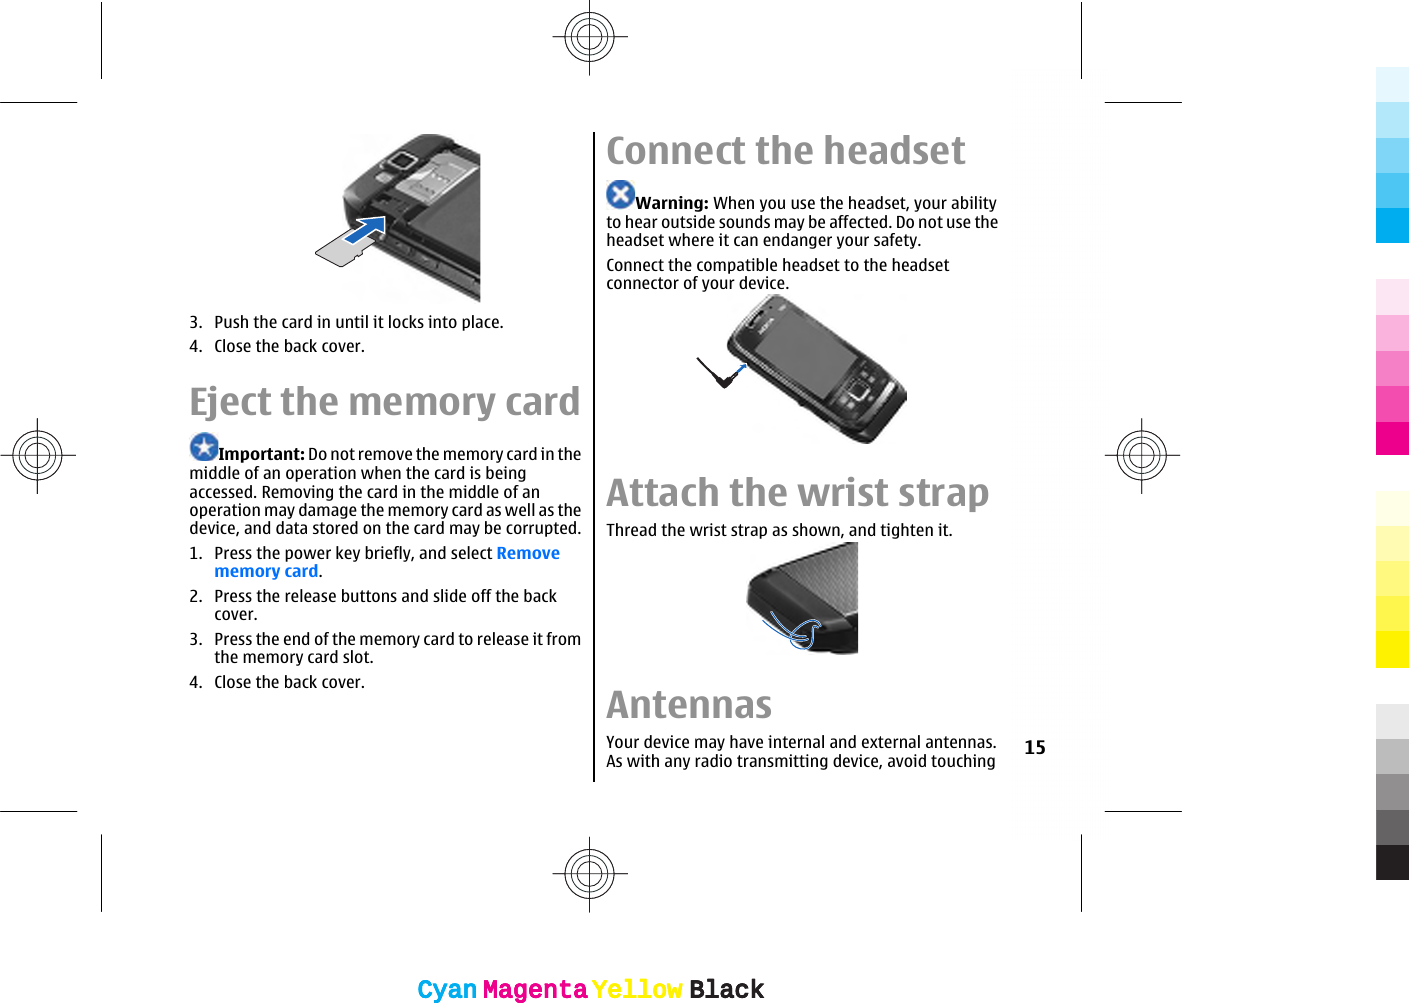 3. Push the card in until it locks into place.4. Close the back cover.Eject the memory cardImportant: Do not remove the memory card in themiddle of an operation when the card is beingaccessed. Removing the card in the middle of anoperation may damage the memory card as well as thedevice, and data stored on the card may be corrupted.1. Press the power key briefly, and select Removememory card.2. Press the release buttons and slide off the backcover.3. Press the end of the memory card to release it fromthe memory card slot.4. Close the back cover.Connect the headsetWarning: When you use the headset, your abilityto hear outside sounds may be affected. Do not use theheadset where it can endanger your safety.Connect the compatible headset to the headsetconnector of your device.Attach the wrist strapThread the wrist strap as shown, and tighten it.AntennasYour device may have internal and external antennas.As with any radio transmitting device, avoid touching 15CyanCyanMagentaMagentaYellowYellowBlackBlackCyanCyanMagentaMagentaYellowYellowBlackBlack